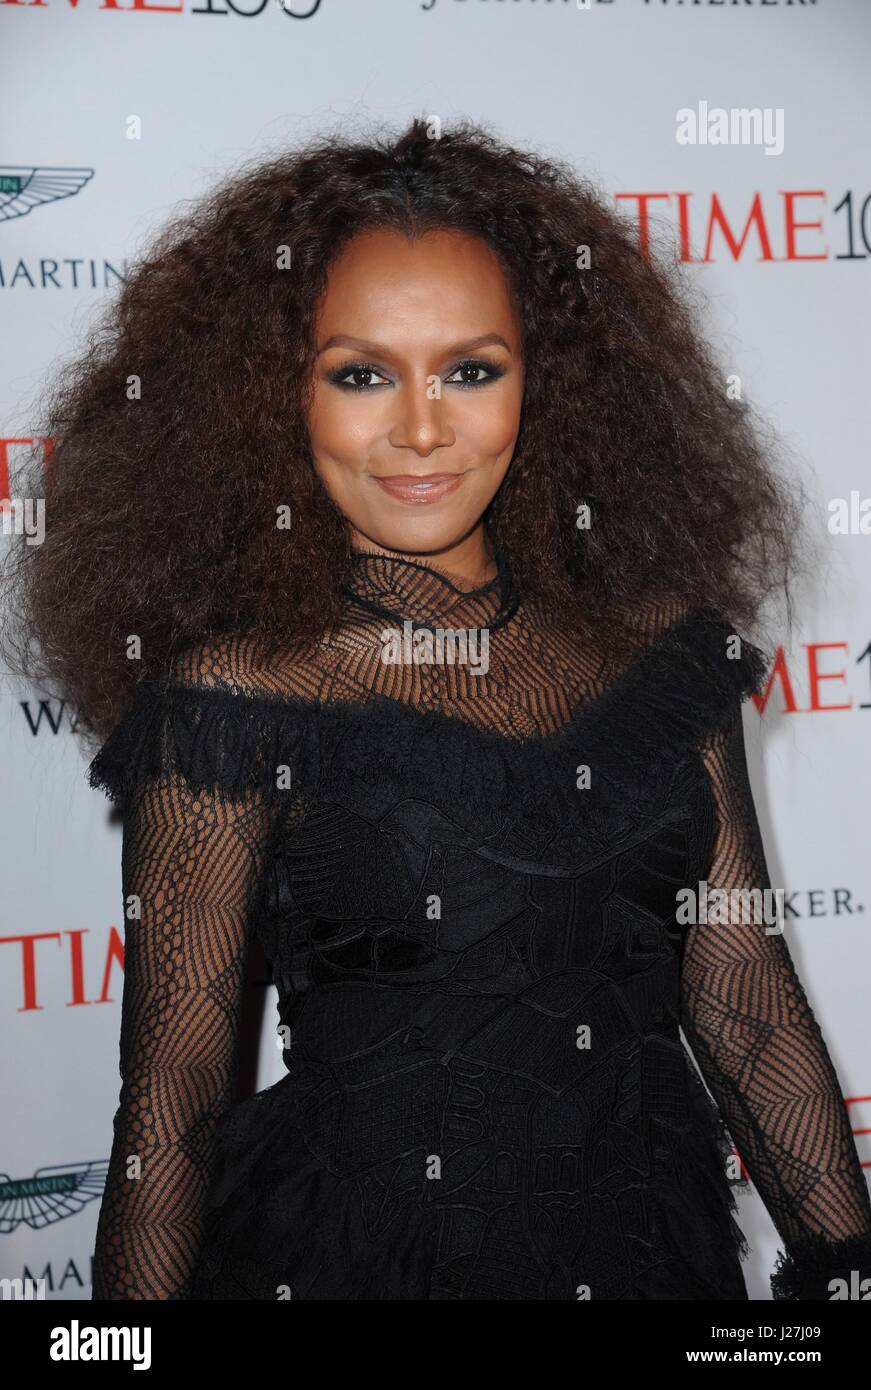 New York, NY, USA. 25th Apr, 2017. Janet Mock at arrivals for TIME 100 Gala Dinner 2017, Jazz at Lincoln Center's Frederick P. Rose Hall, New York, NY April 25, 2017. Credit: Kristin Callahan/Everett Collection/Alamy Live News Stock Photo